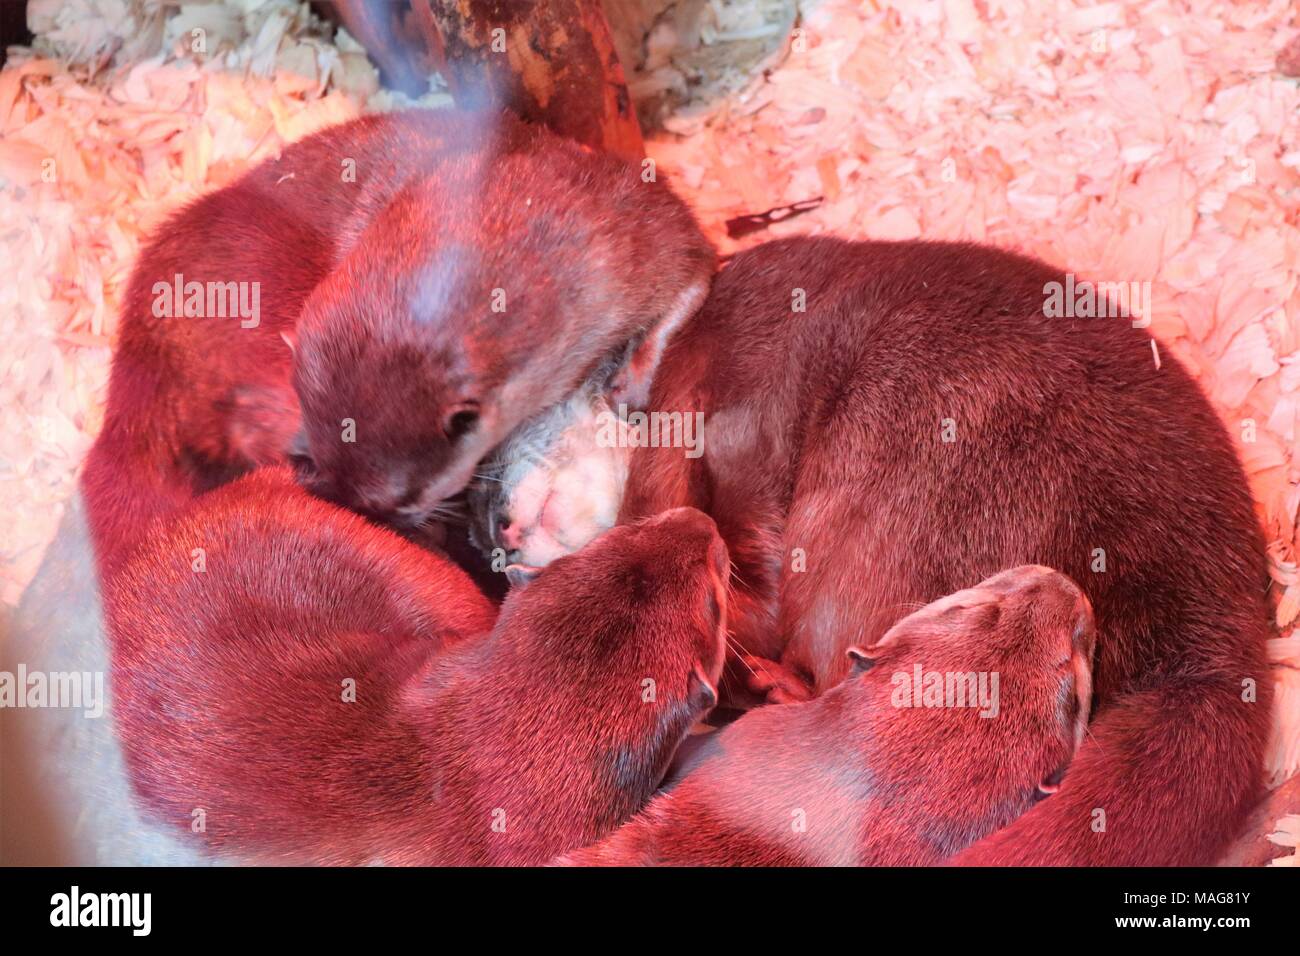 Romp of sleeping otters huddled together under a red heat lamp at a tourist attraction Stock Photo